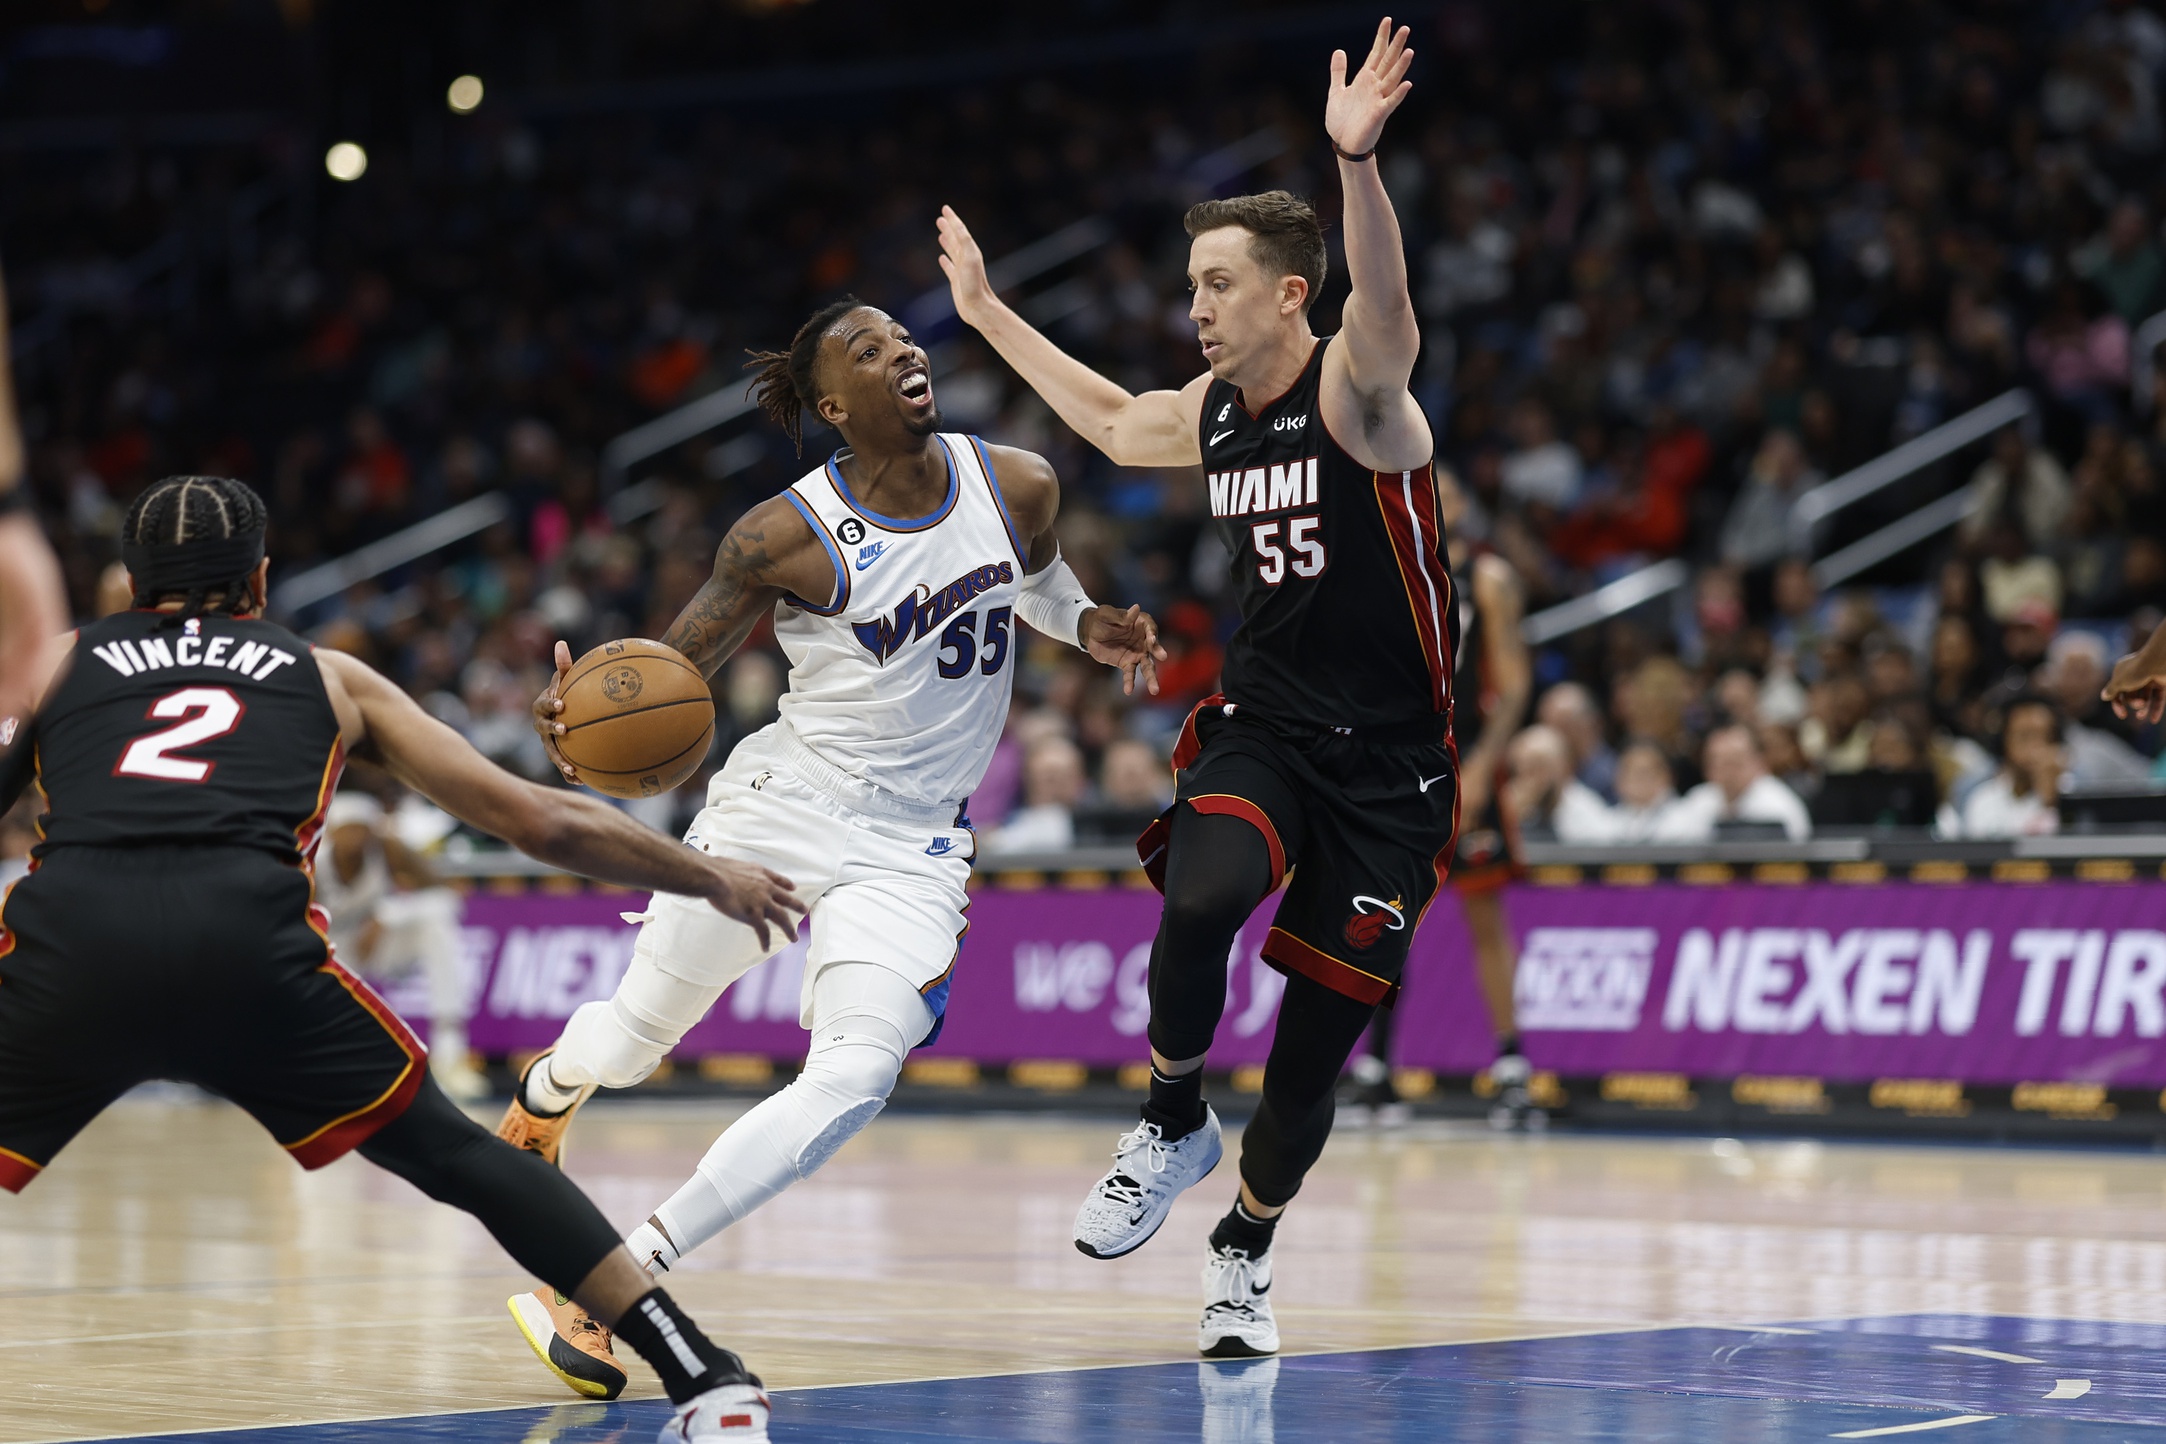 Apr 7, 2023; Washington, District of Columbia, USA; Washington Wizards guard Delon Wright (55) drives to the basket as Miami Heat forward Duncan Robinson (55) and Heat guard Gabe Vincent (2) defend in the third quarter at Capital One Arena. Mandatory Credit: Geoff Burke-USA TODAY Sports